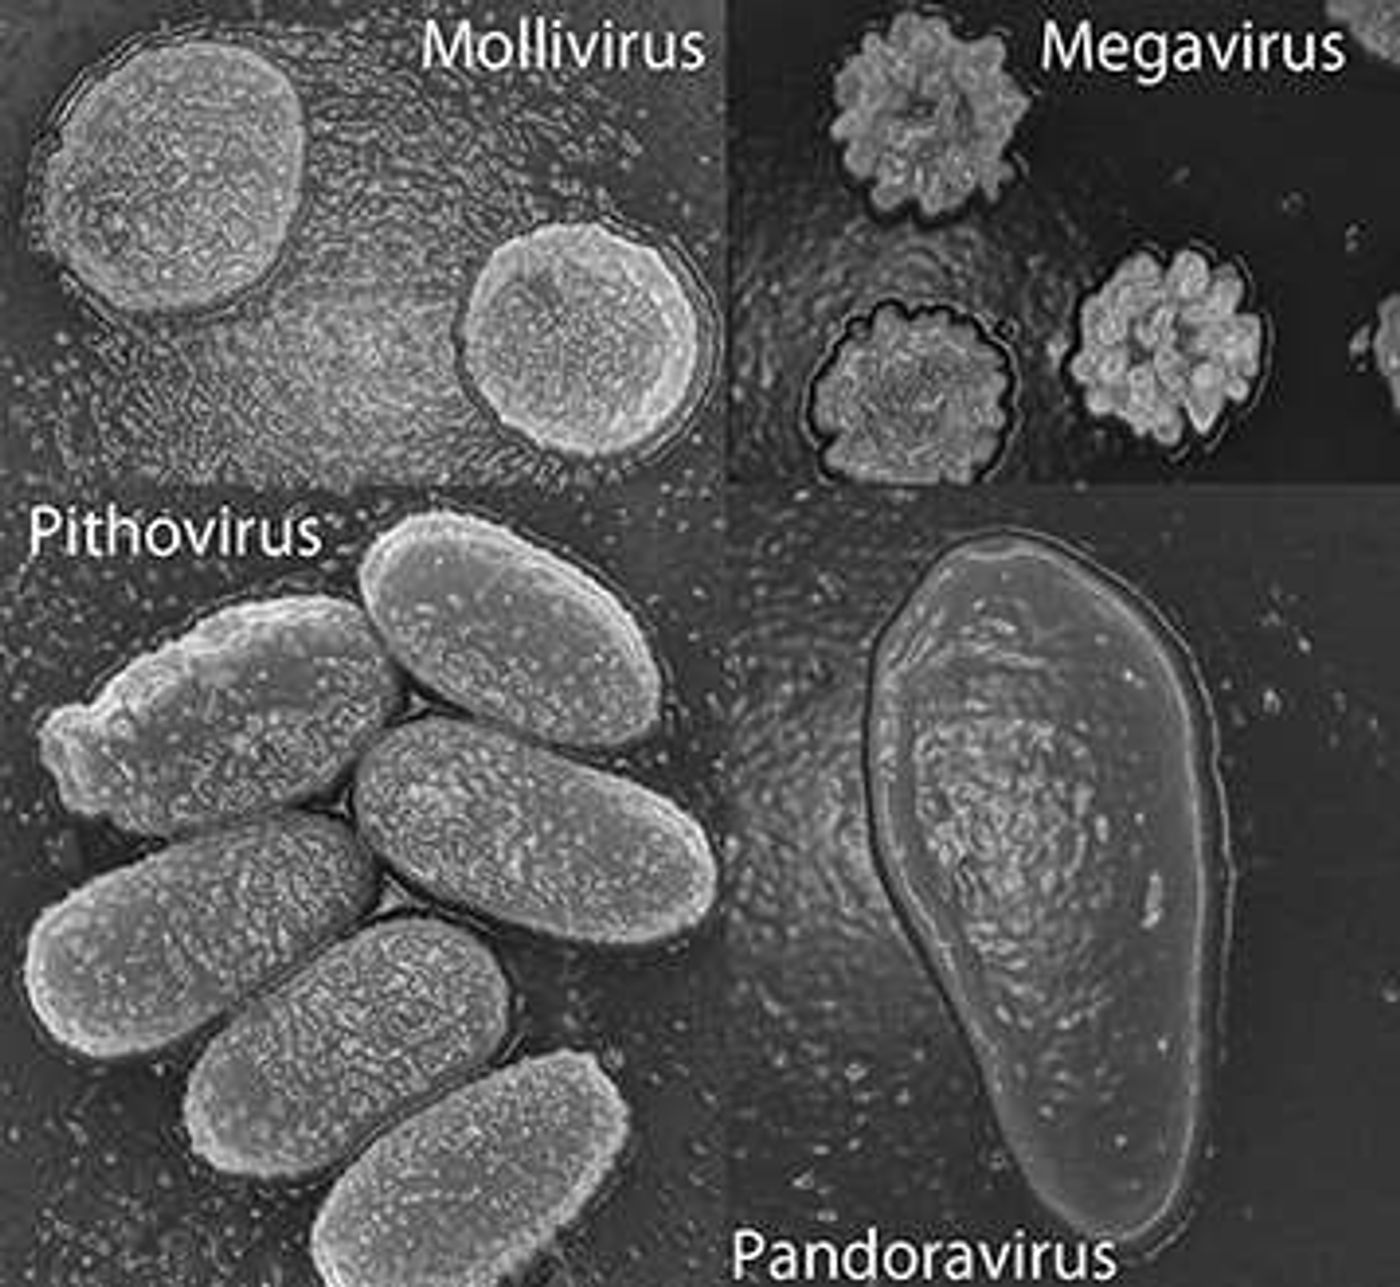 From phys.org Scanning electron microscopy of particles of 4 families of giant viruses that have now been identified. The largest dimensions can reach between 0.6 microns (Mollivirus) and 1.5 microns (Pandoravirus).  Read more at: https://phys.org/news/2015-09-frankenvirus-emerges-siberia-frozen-wasteland.html#jCp